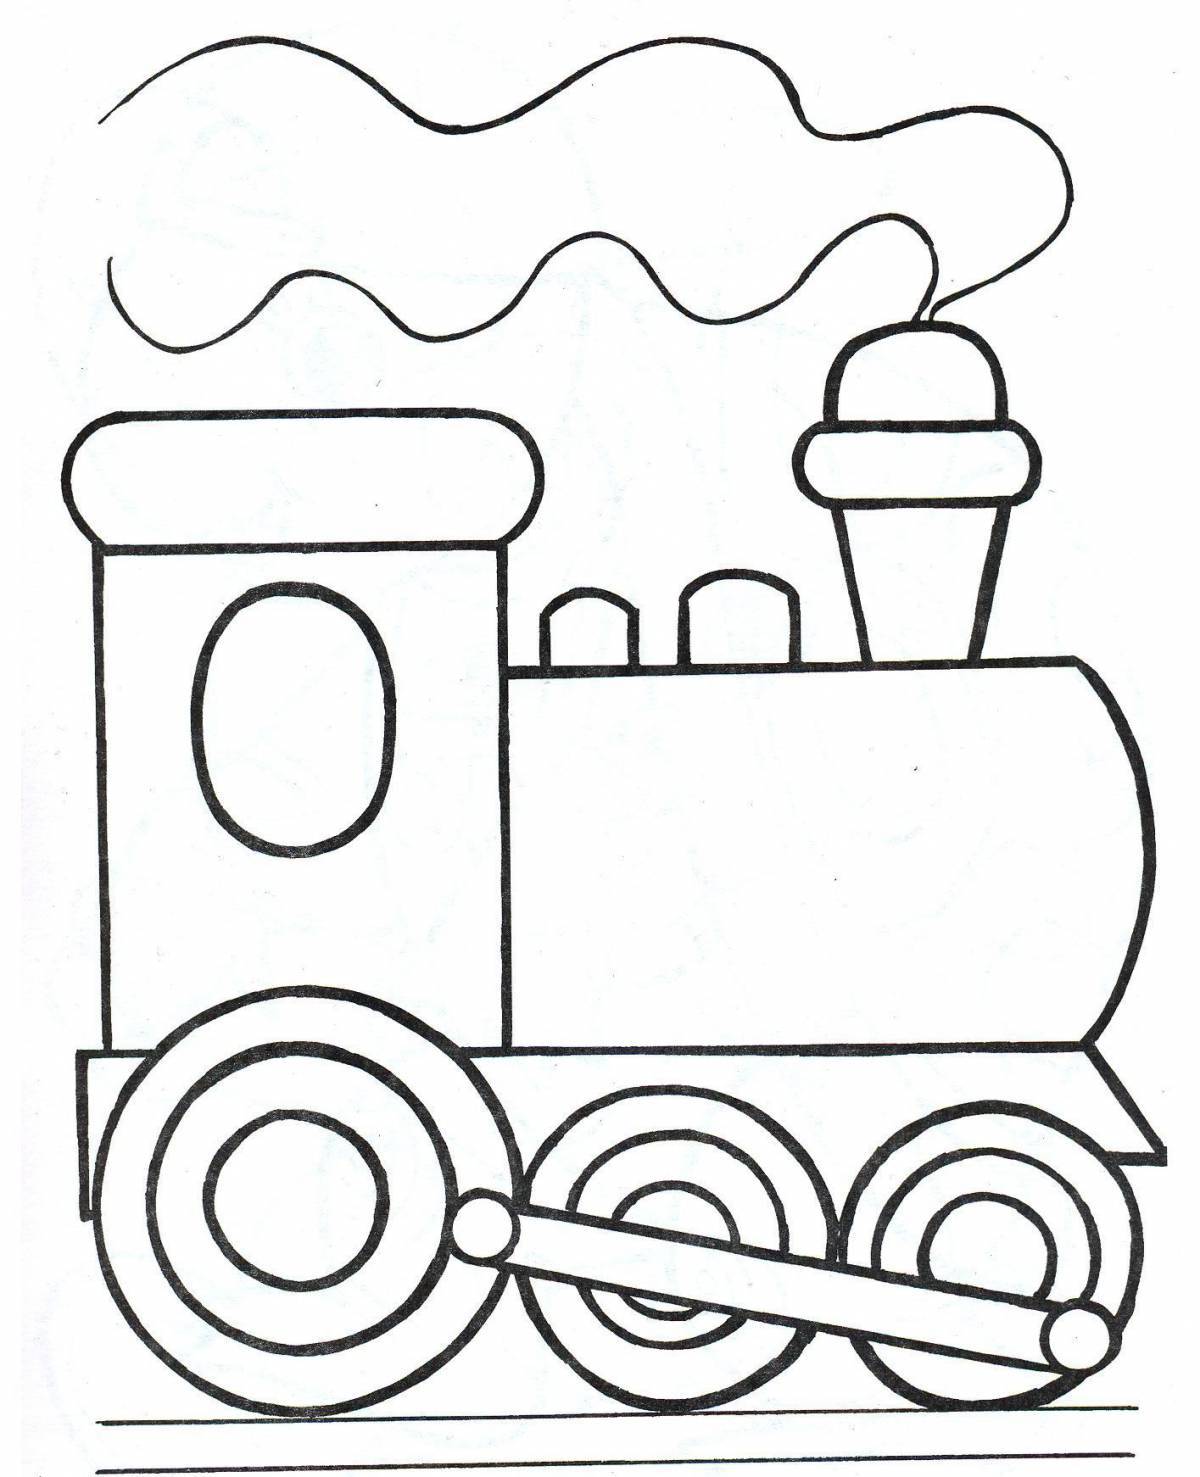 Fun coloring book for 2 year olds